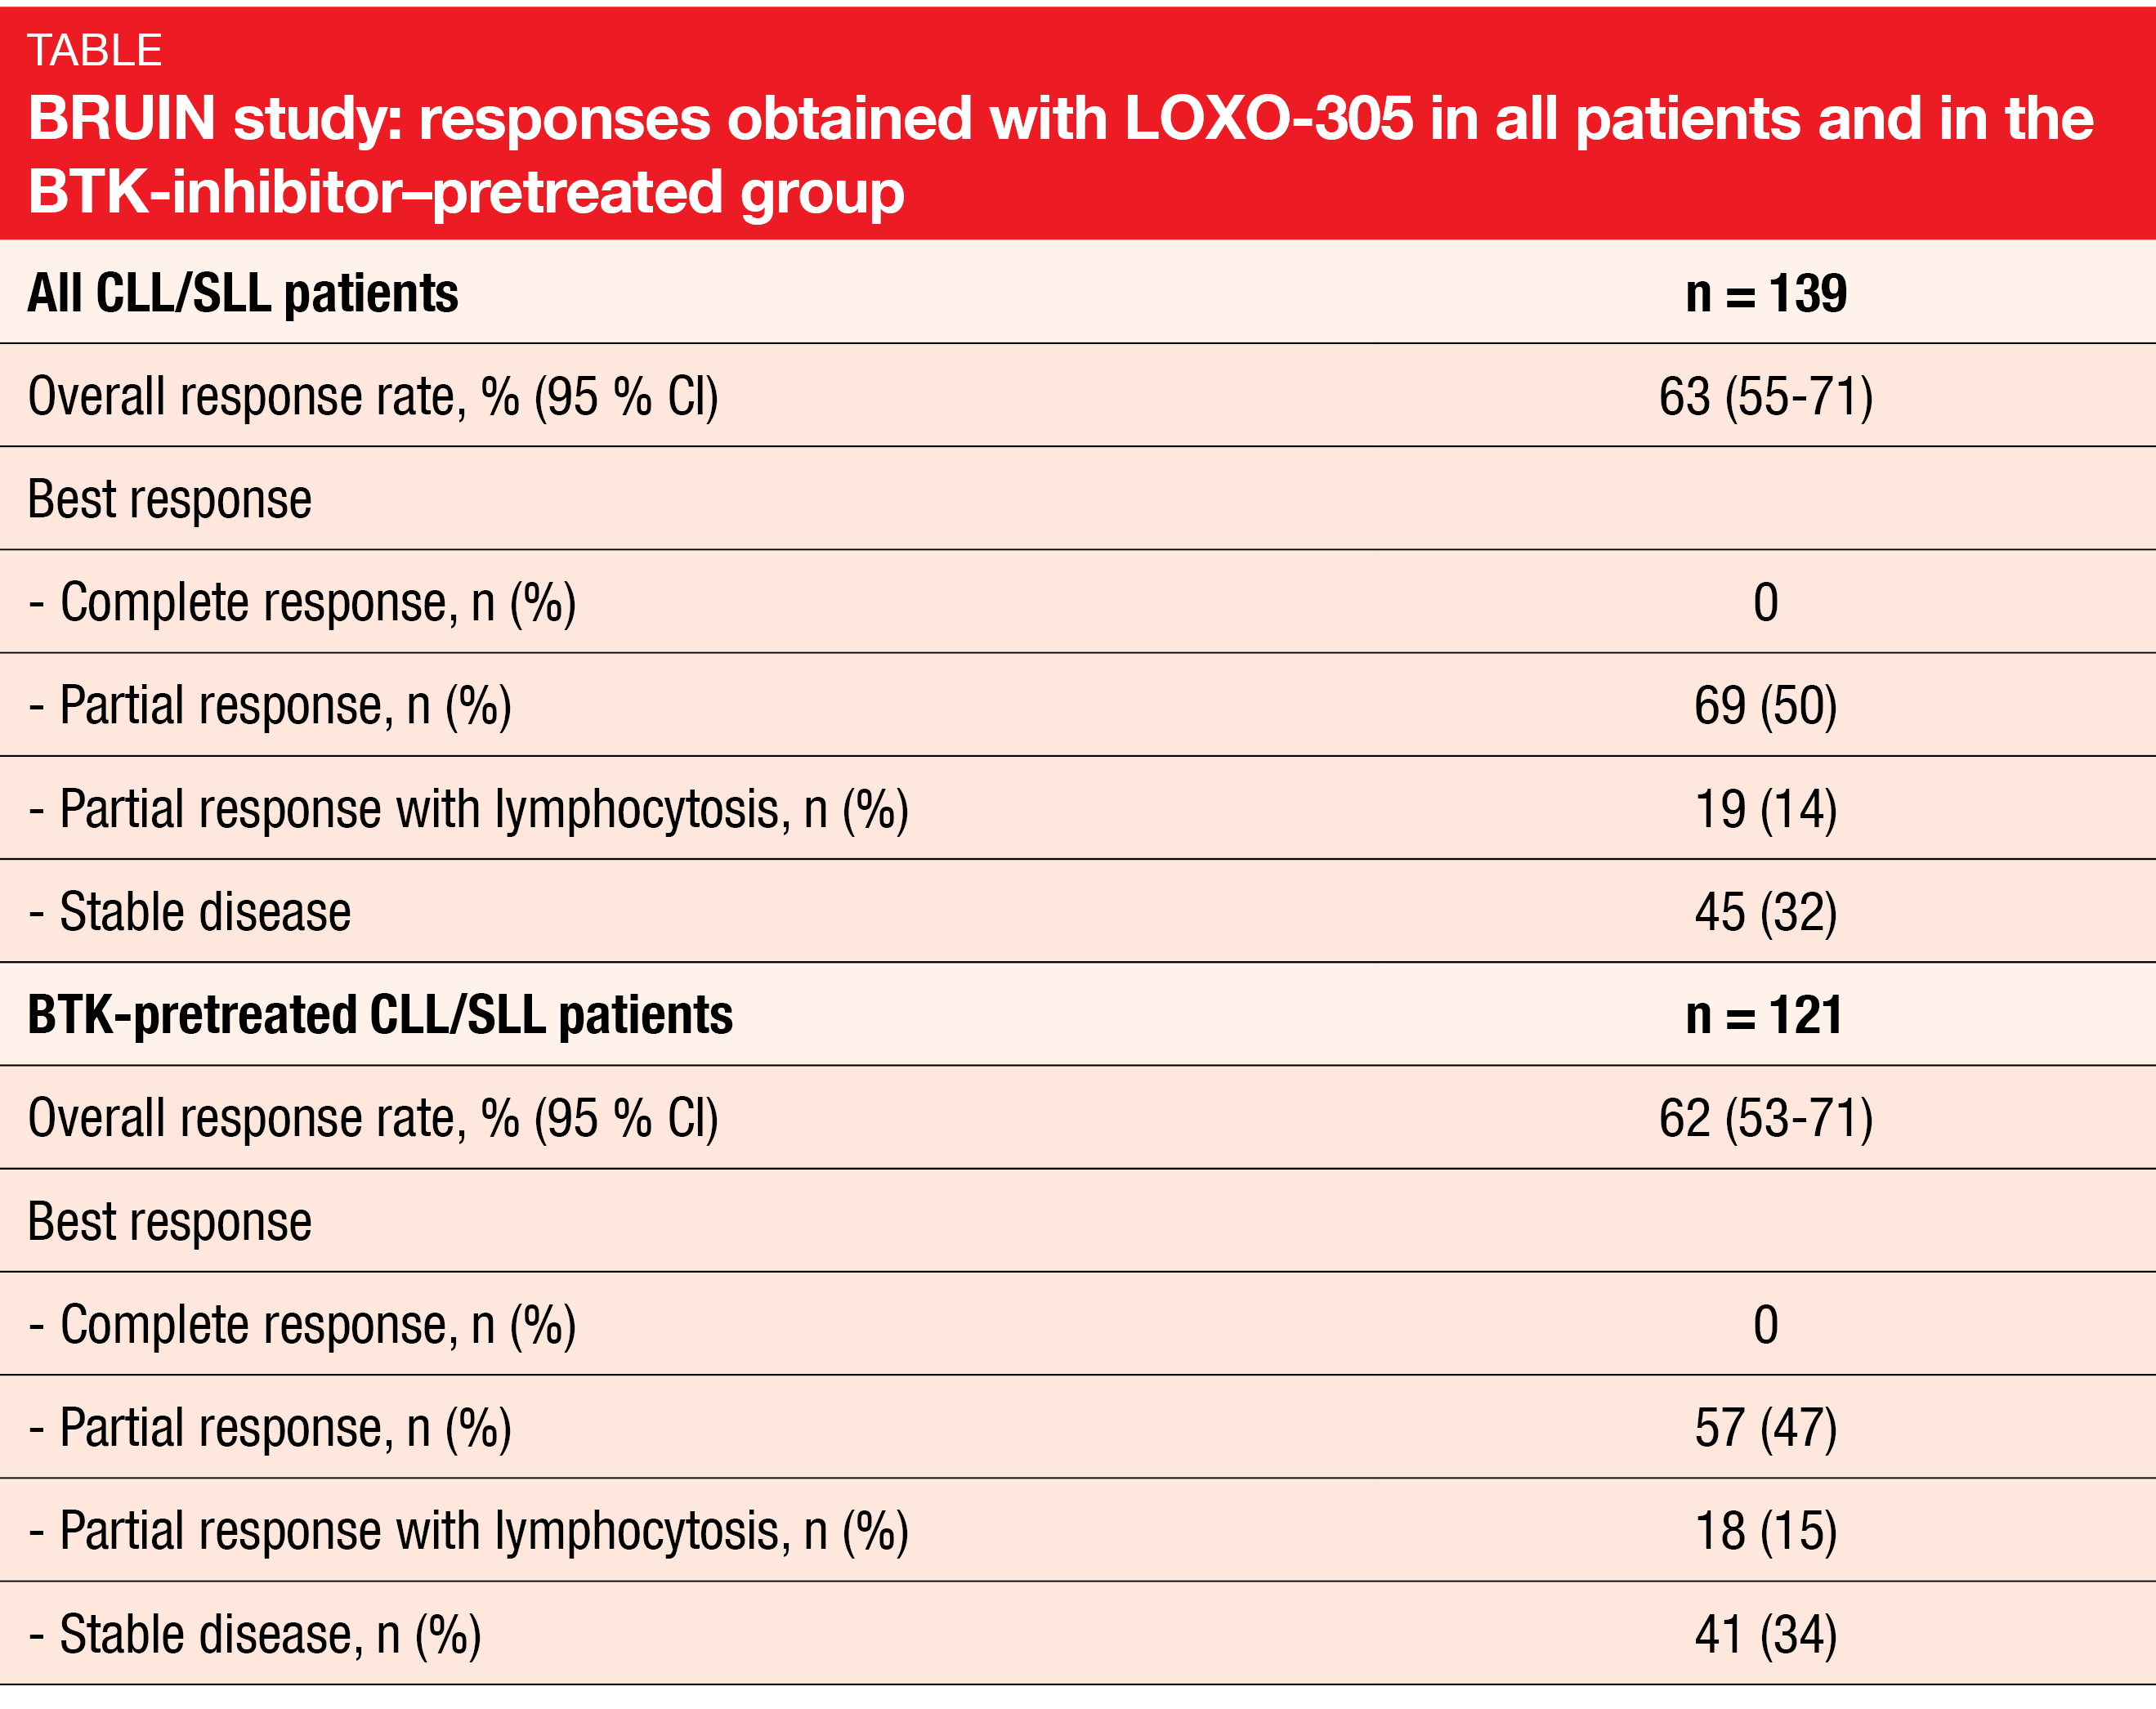 Table BRUIN study: responses obtained with LOXO-305 in all patients and in the BTK-inhibitor–pretreated group